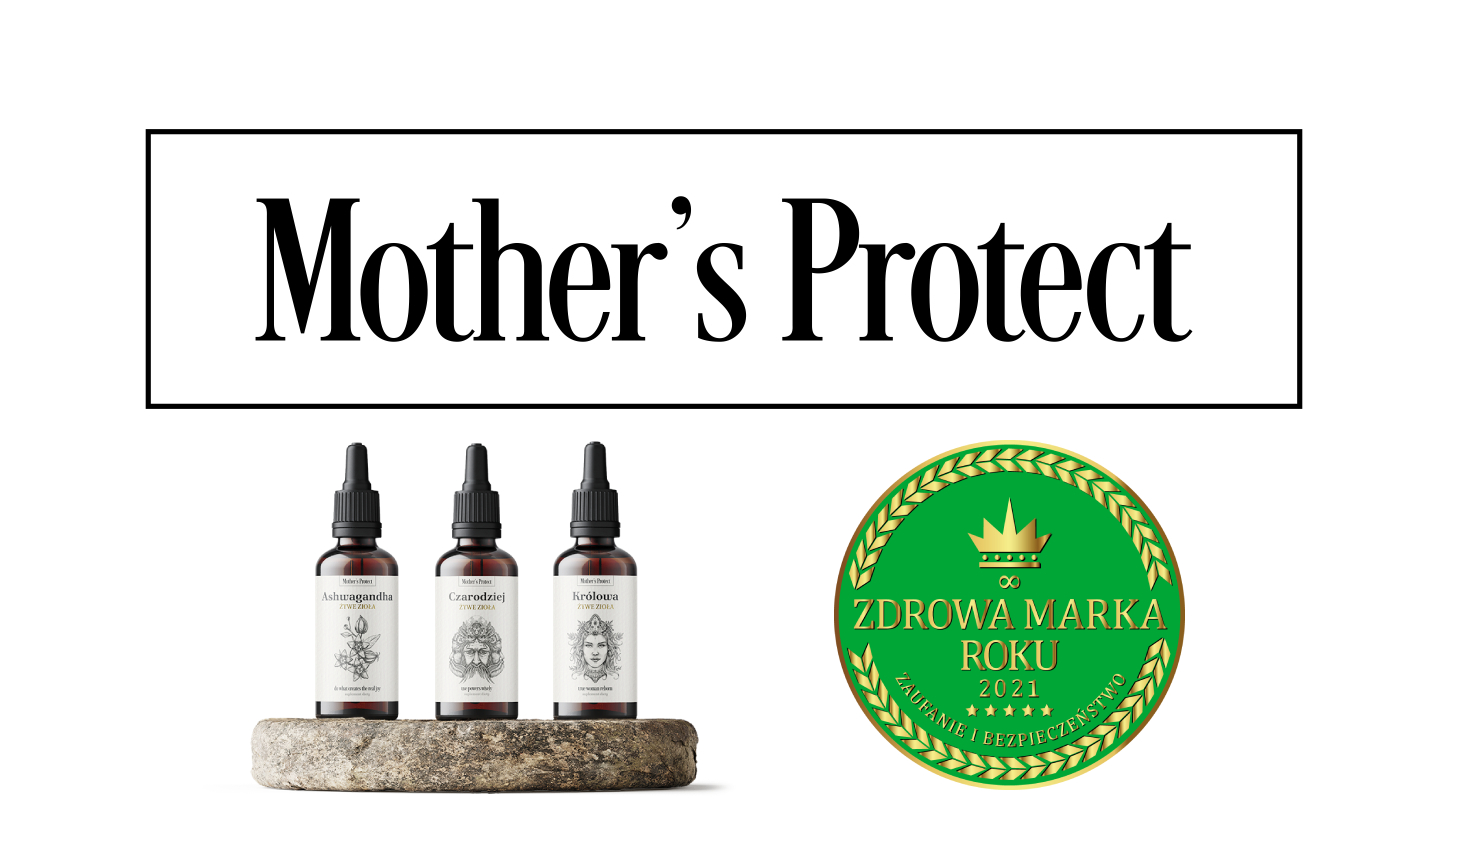 Naturalne wsparcie od Mother's Protect!